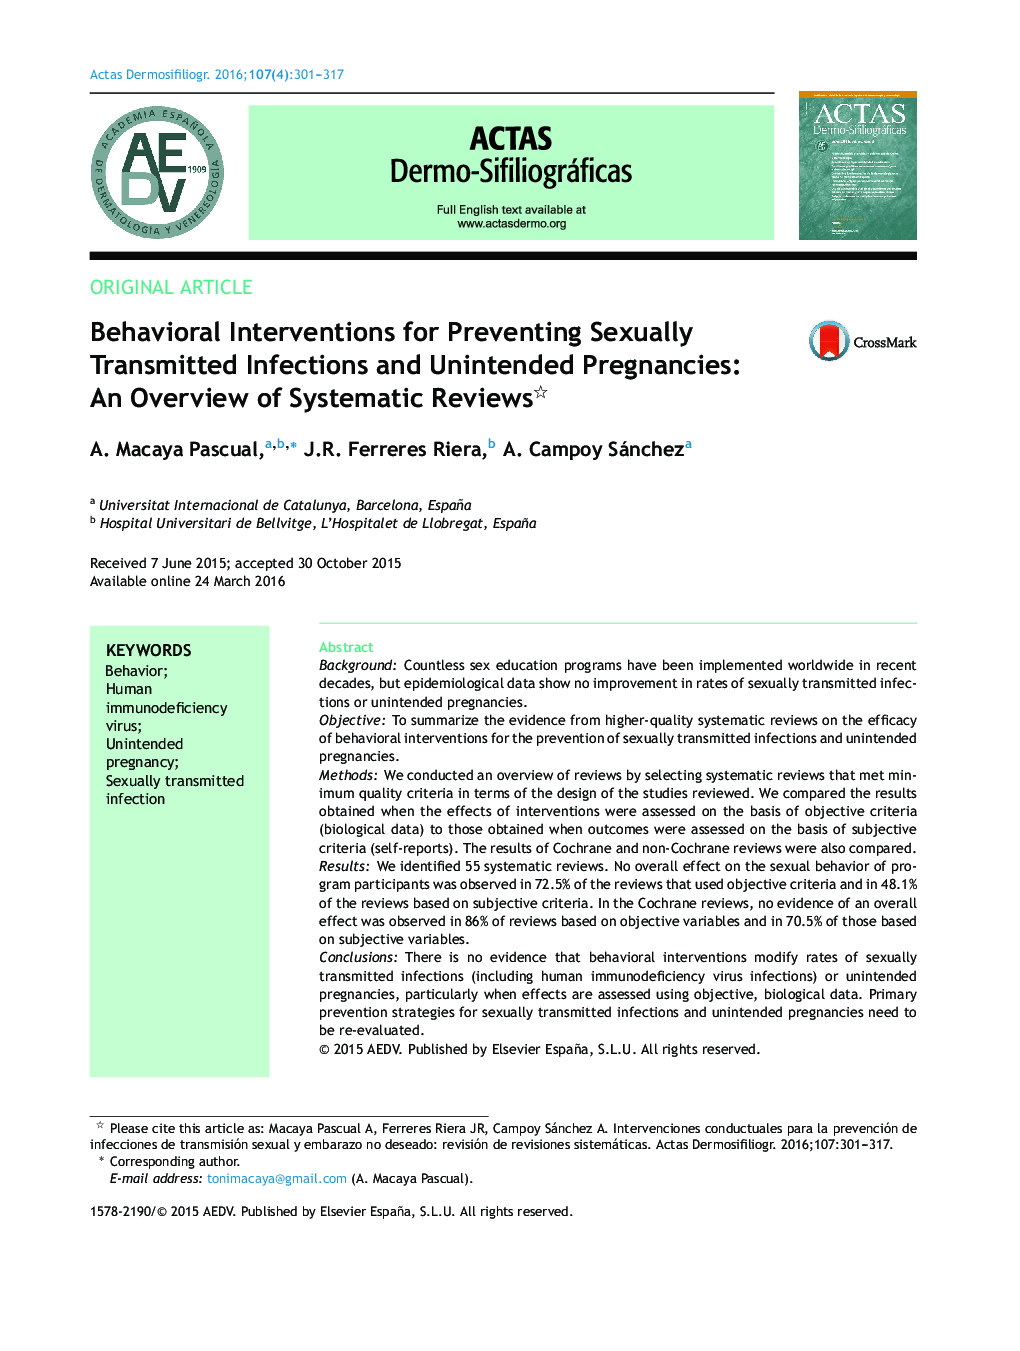 Behavioral Interventions for Preventing Sexually Transmitted Infections and Unintended Pregnancies: An Overview of Systematic Reviews 